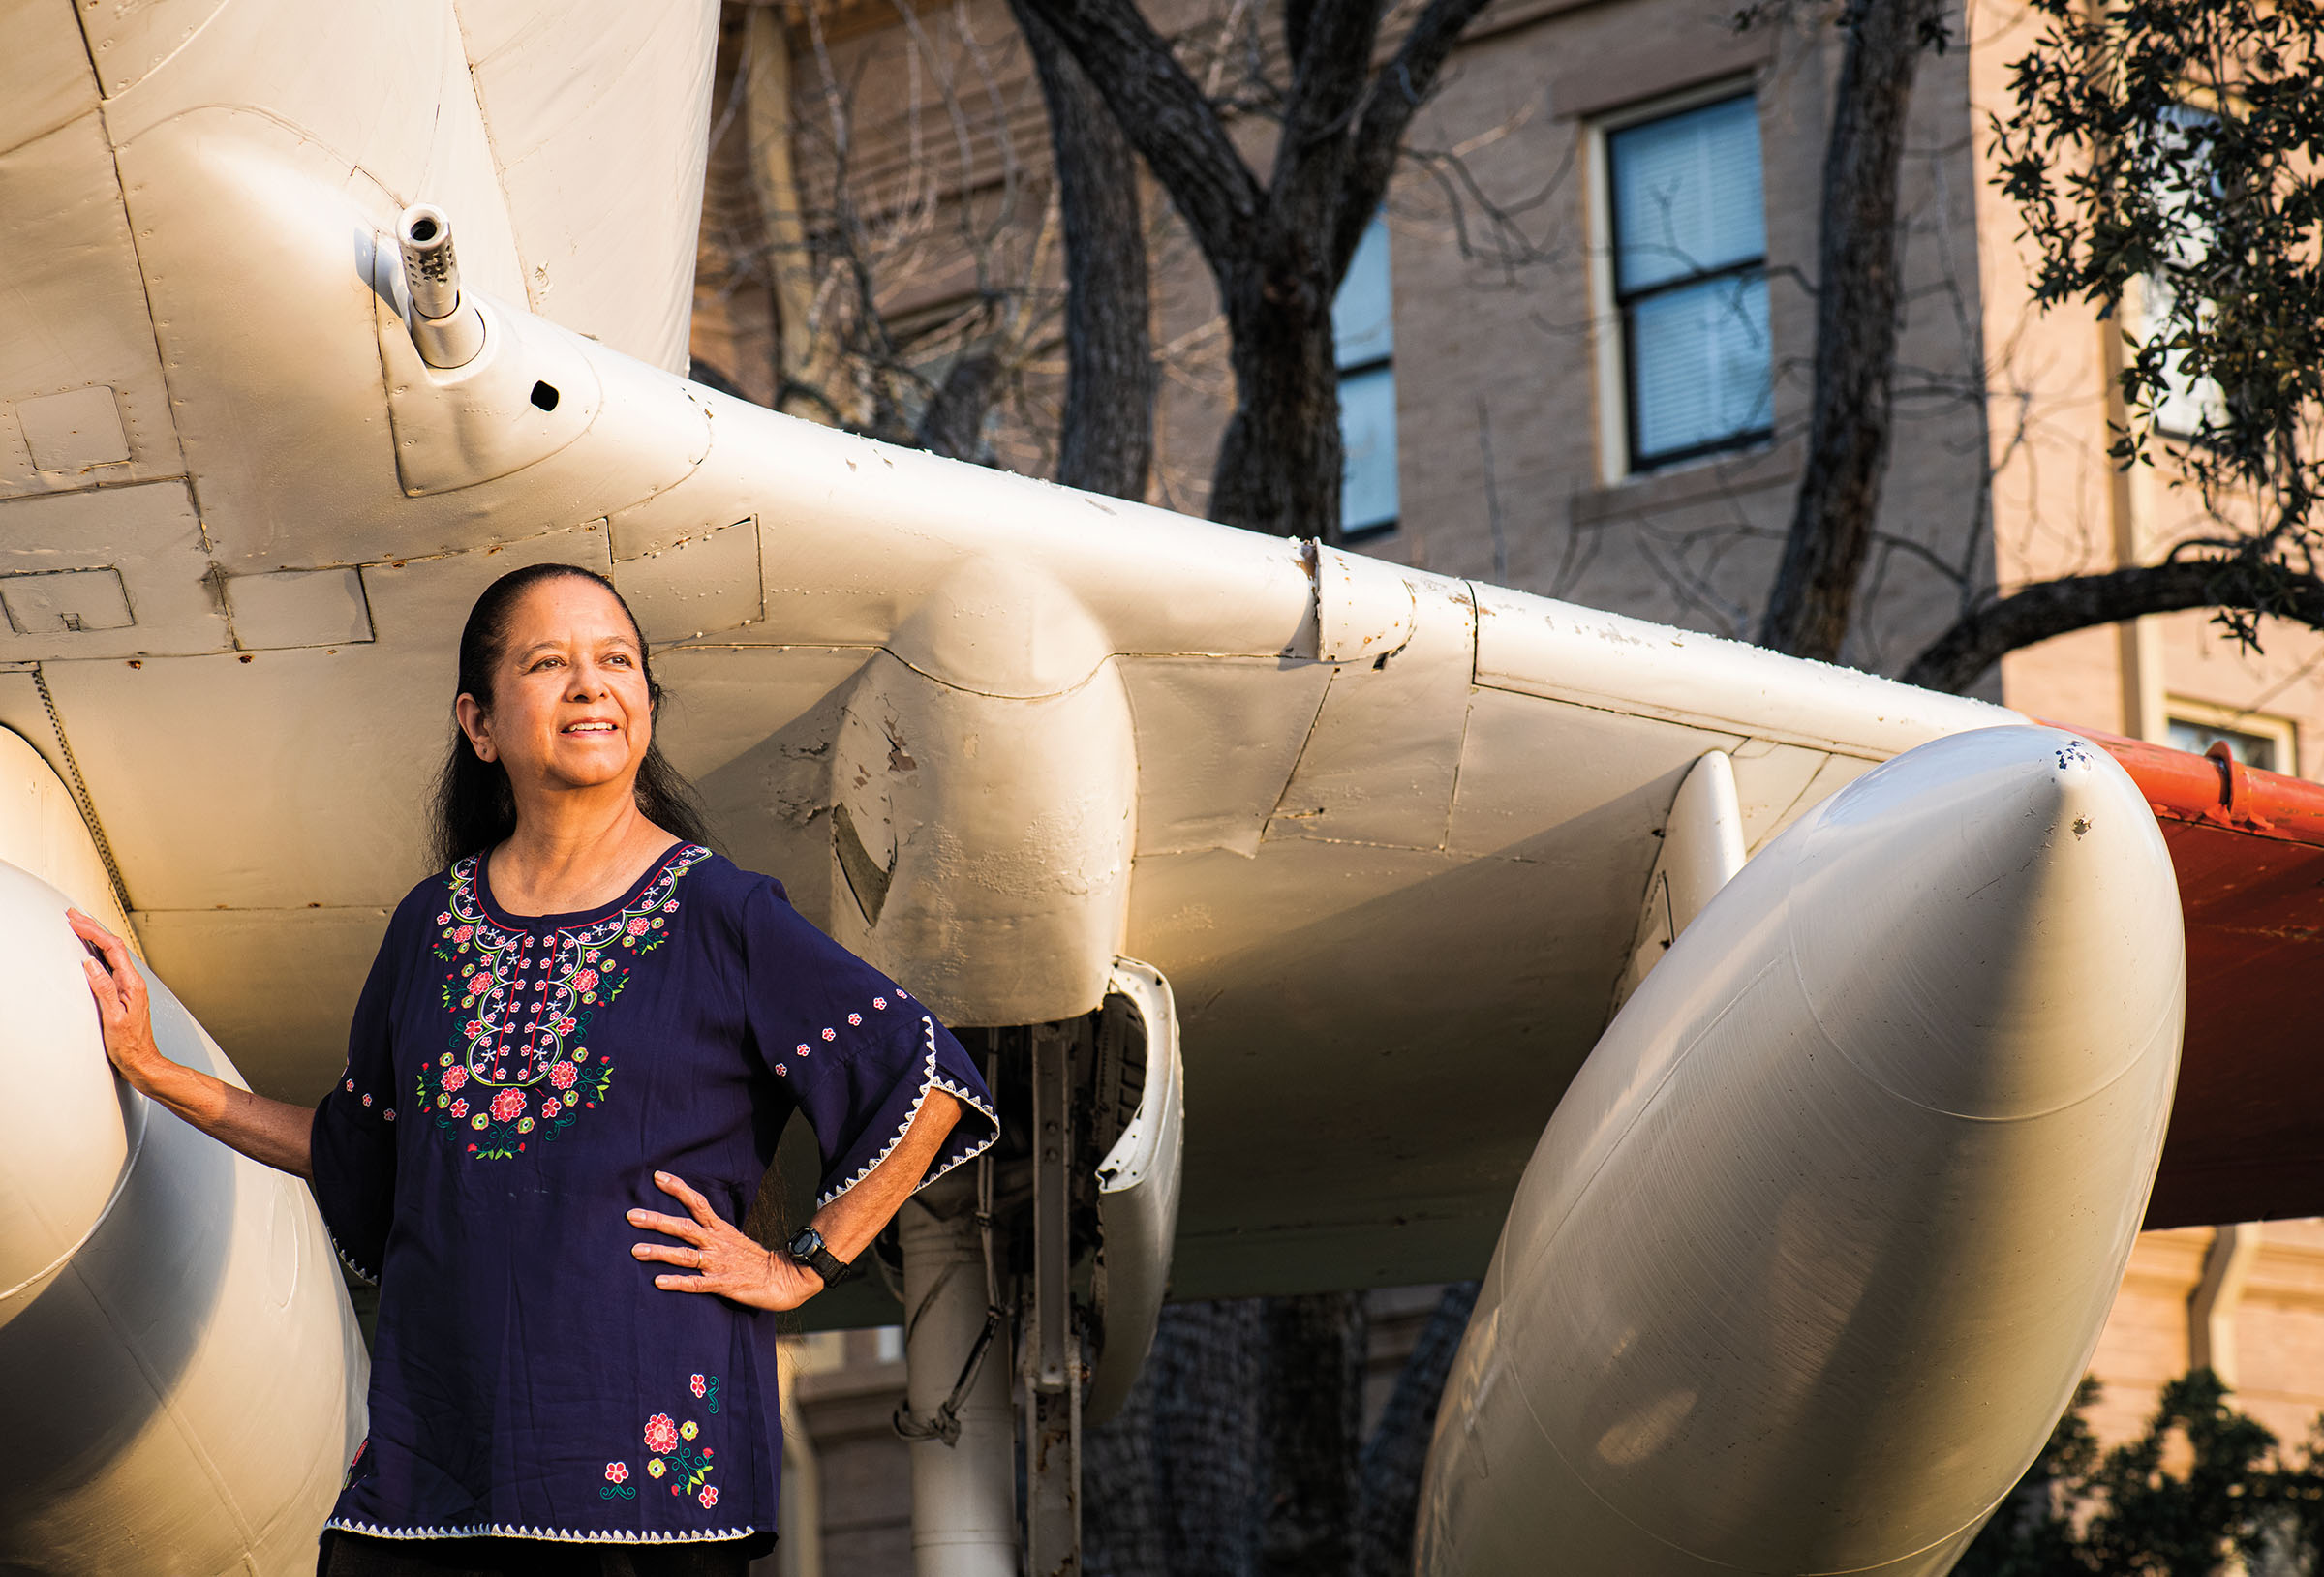 A woman in a purple shirt stands in front of a replica of an airplane in front of a stone courthouse